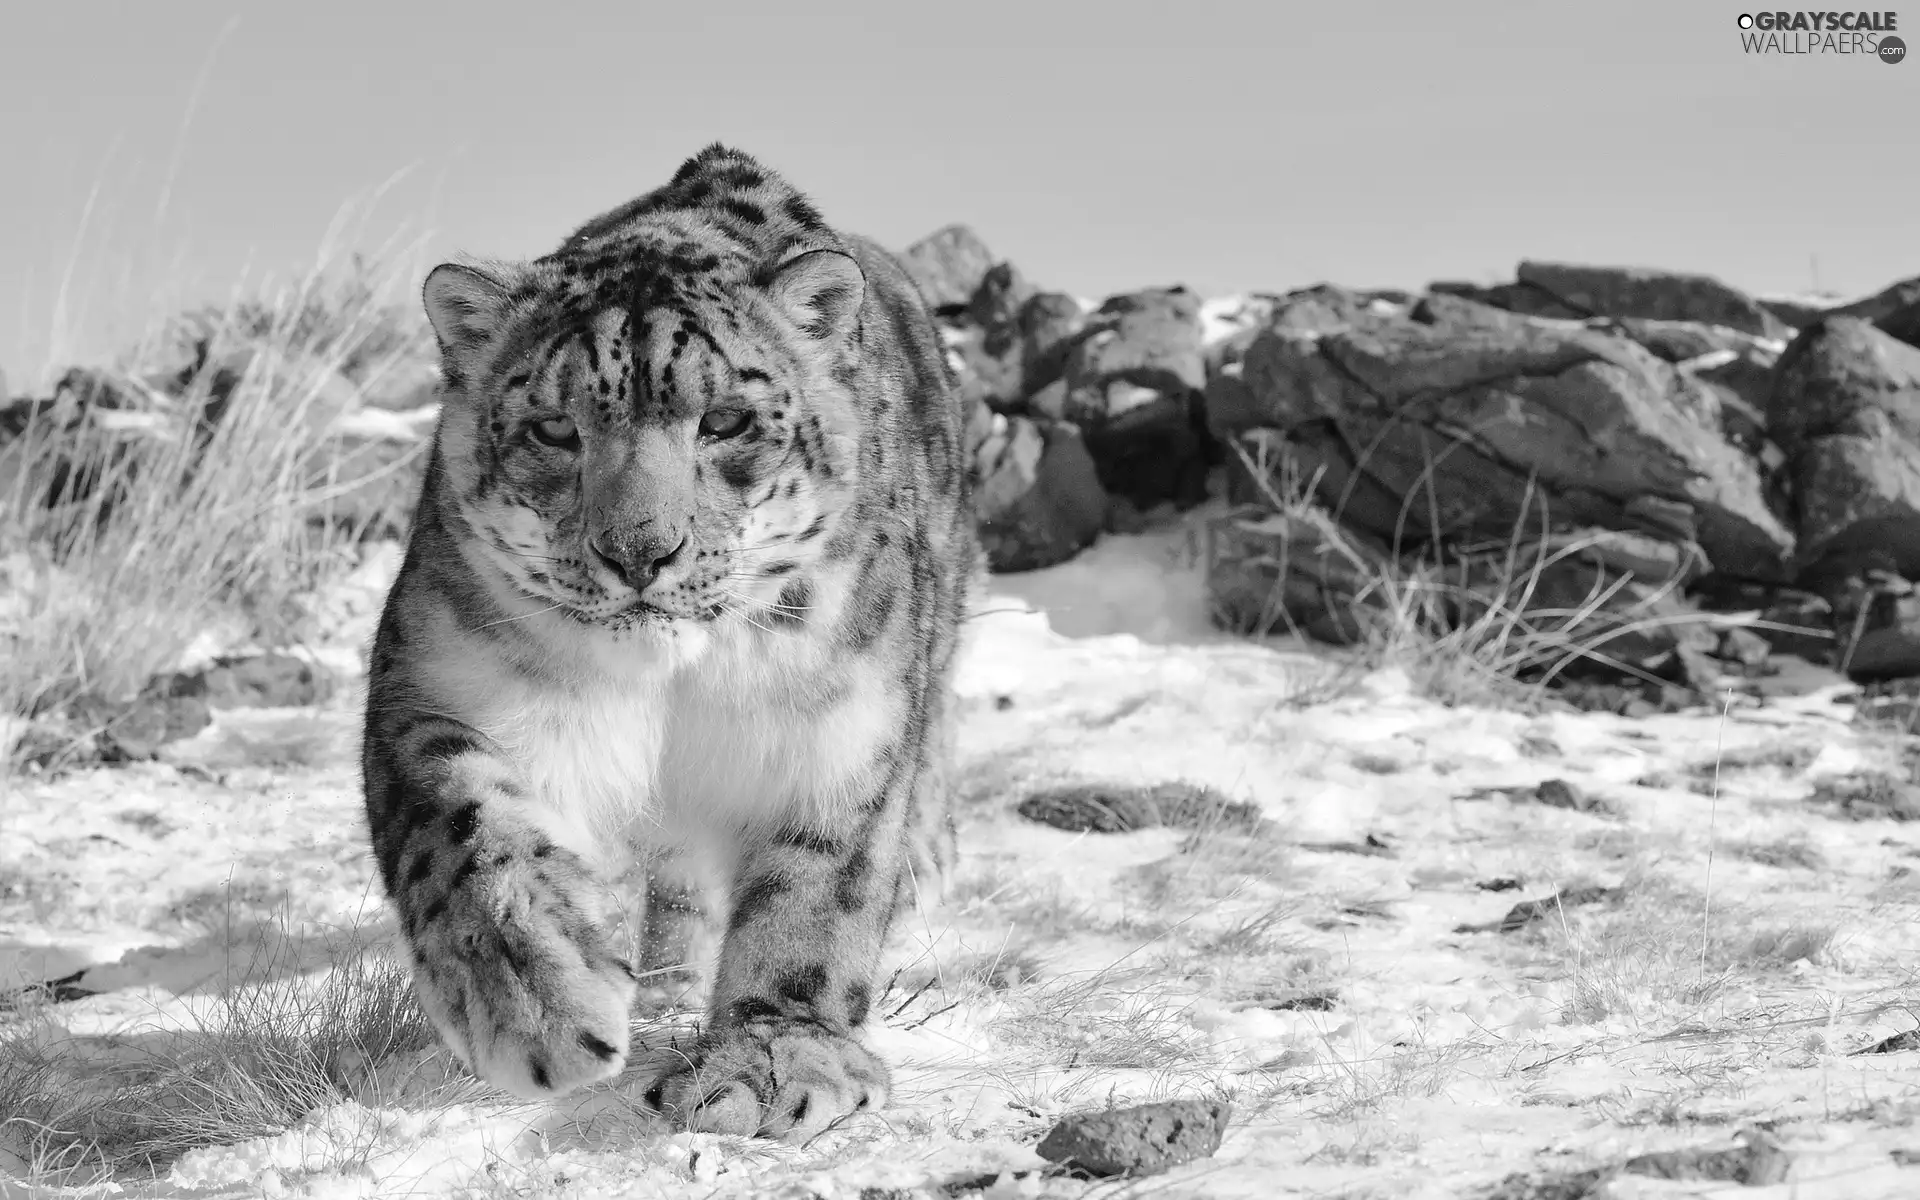 Grayscale winter, snow leopard, snow, rocks, Panther - 1920x1200